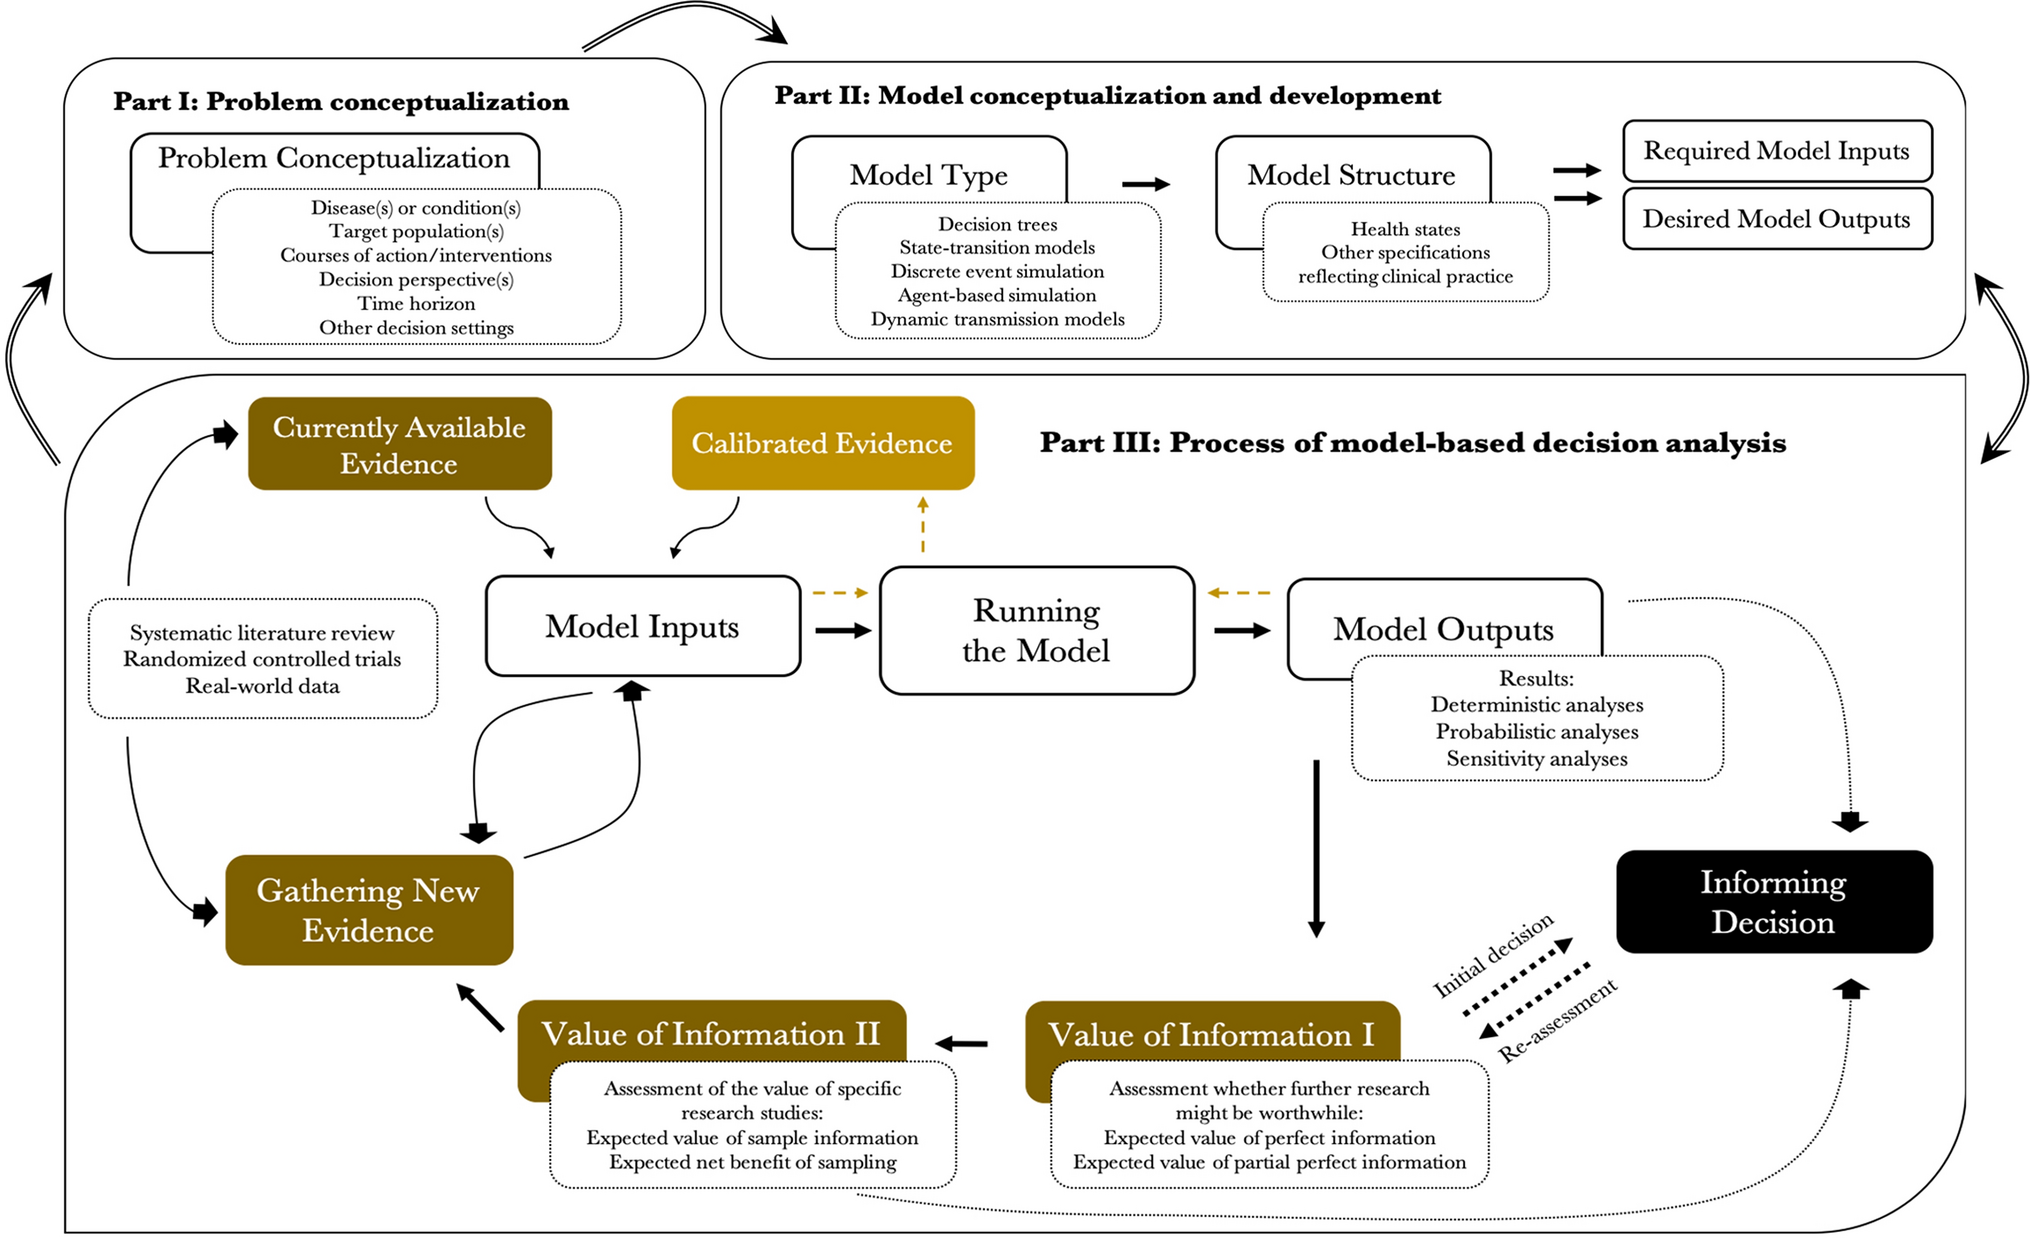 A Guide to an Iterative Approach to Model-Based Decision Making in Health and Medicine: An Iterative Decision-Making Framework